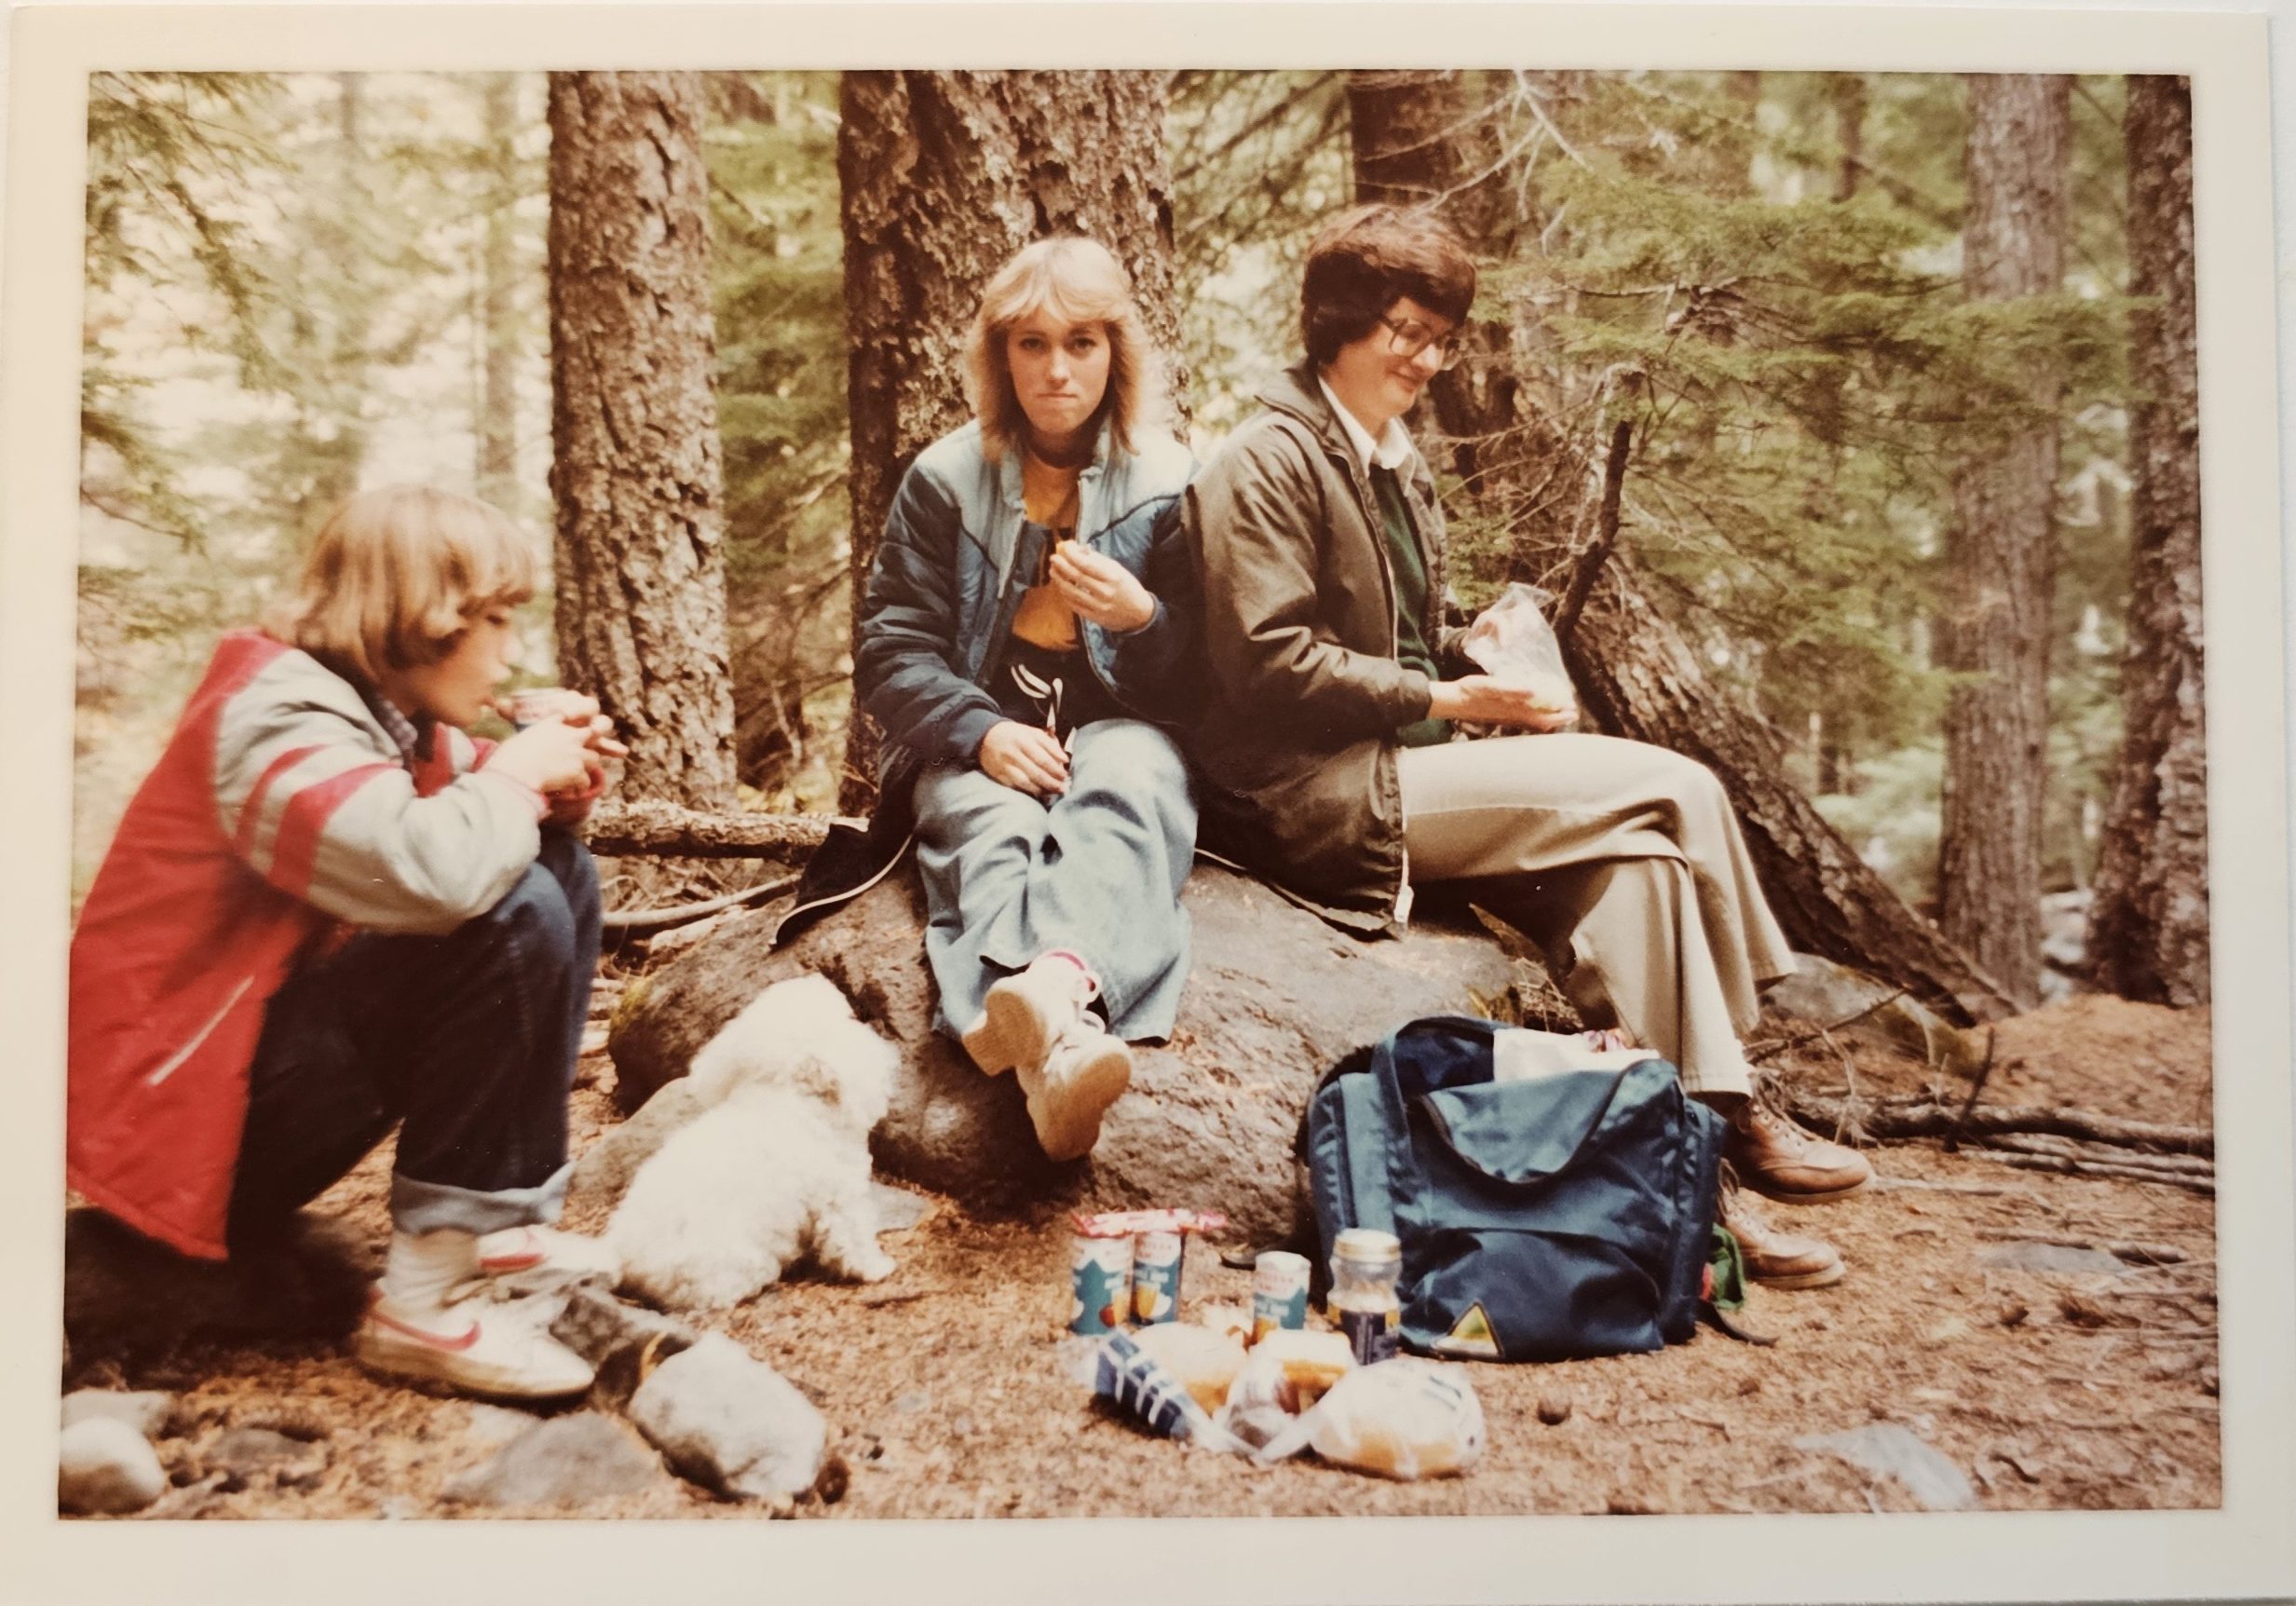 Mother and two daughters sitting on a log in the forest.